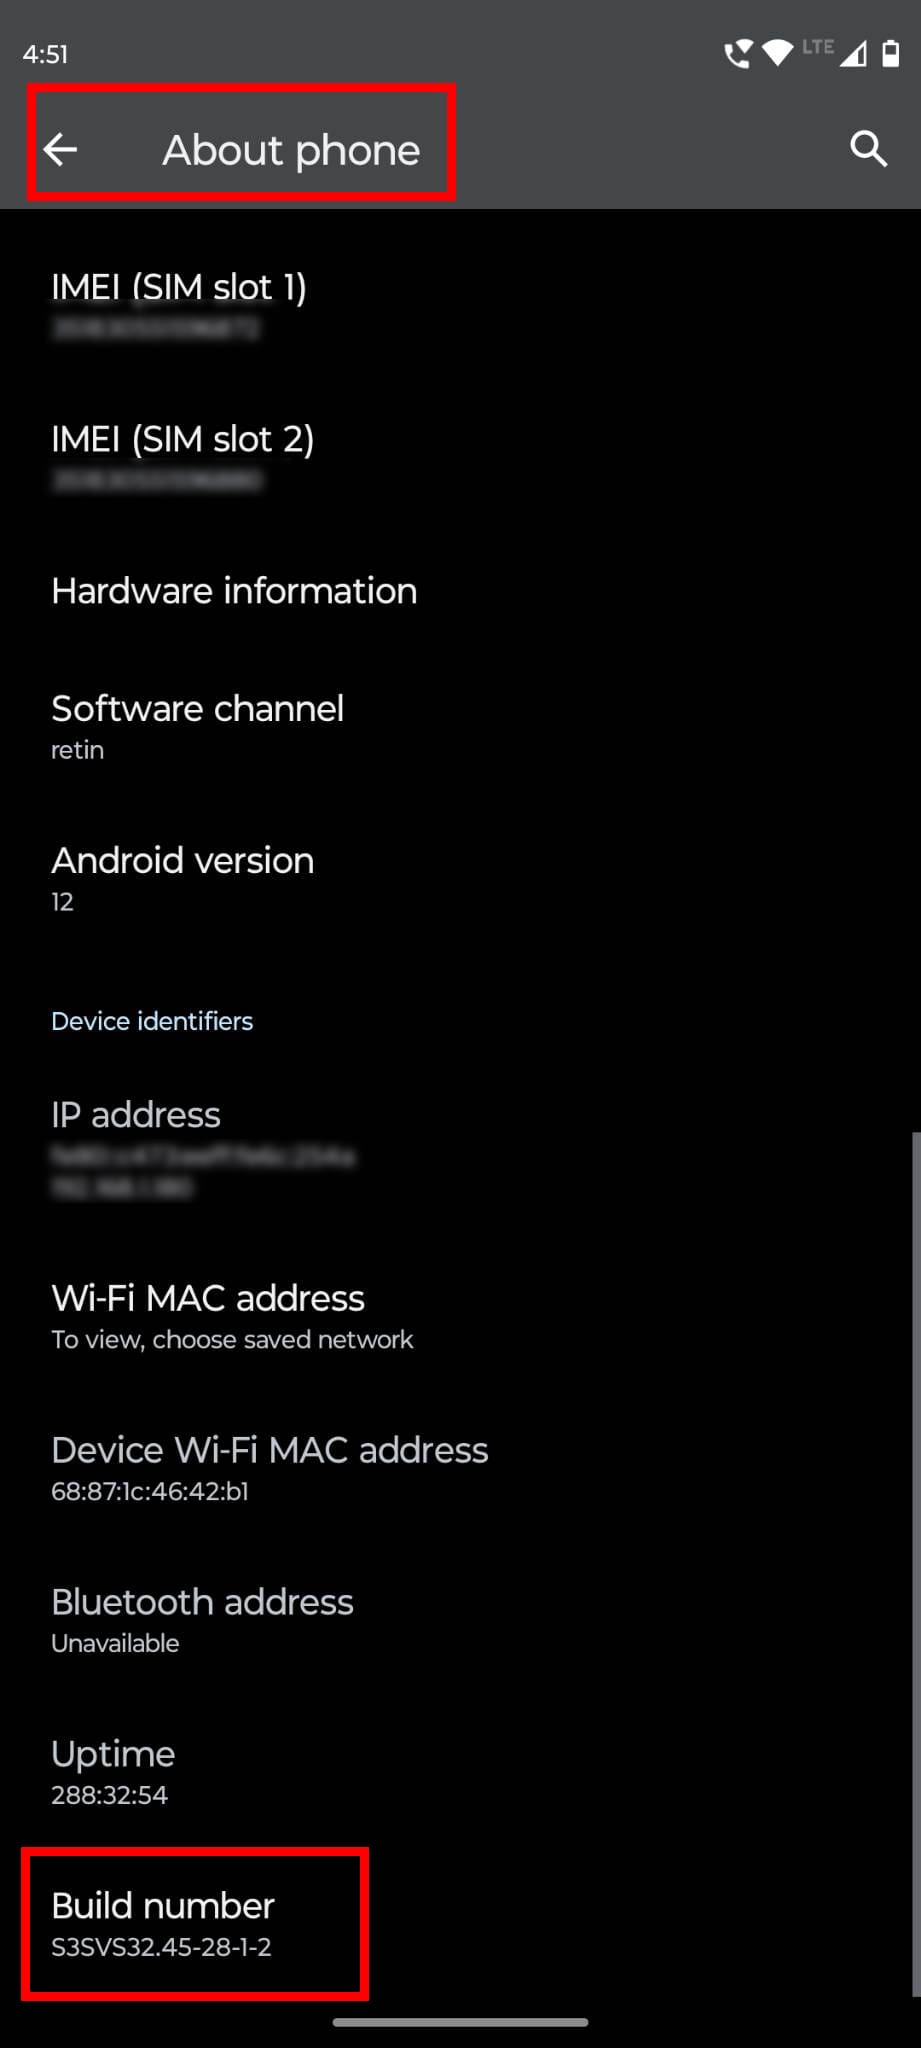 Location of Build number on Settings About Phone